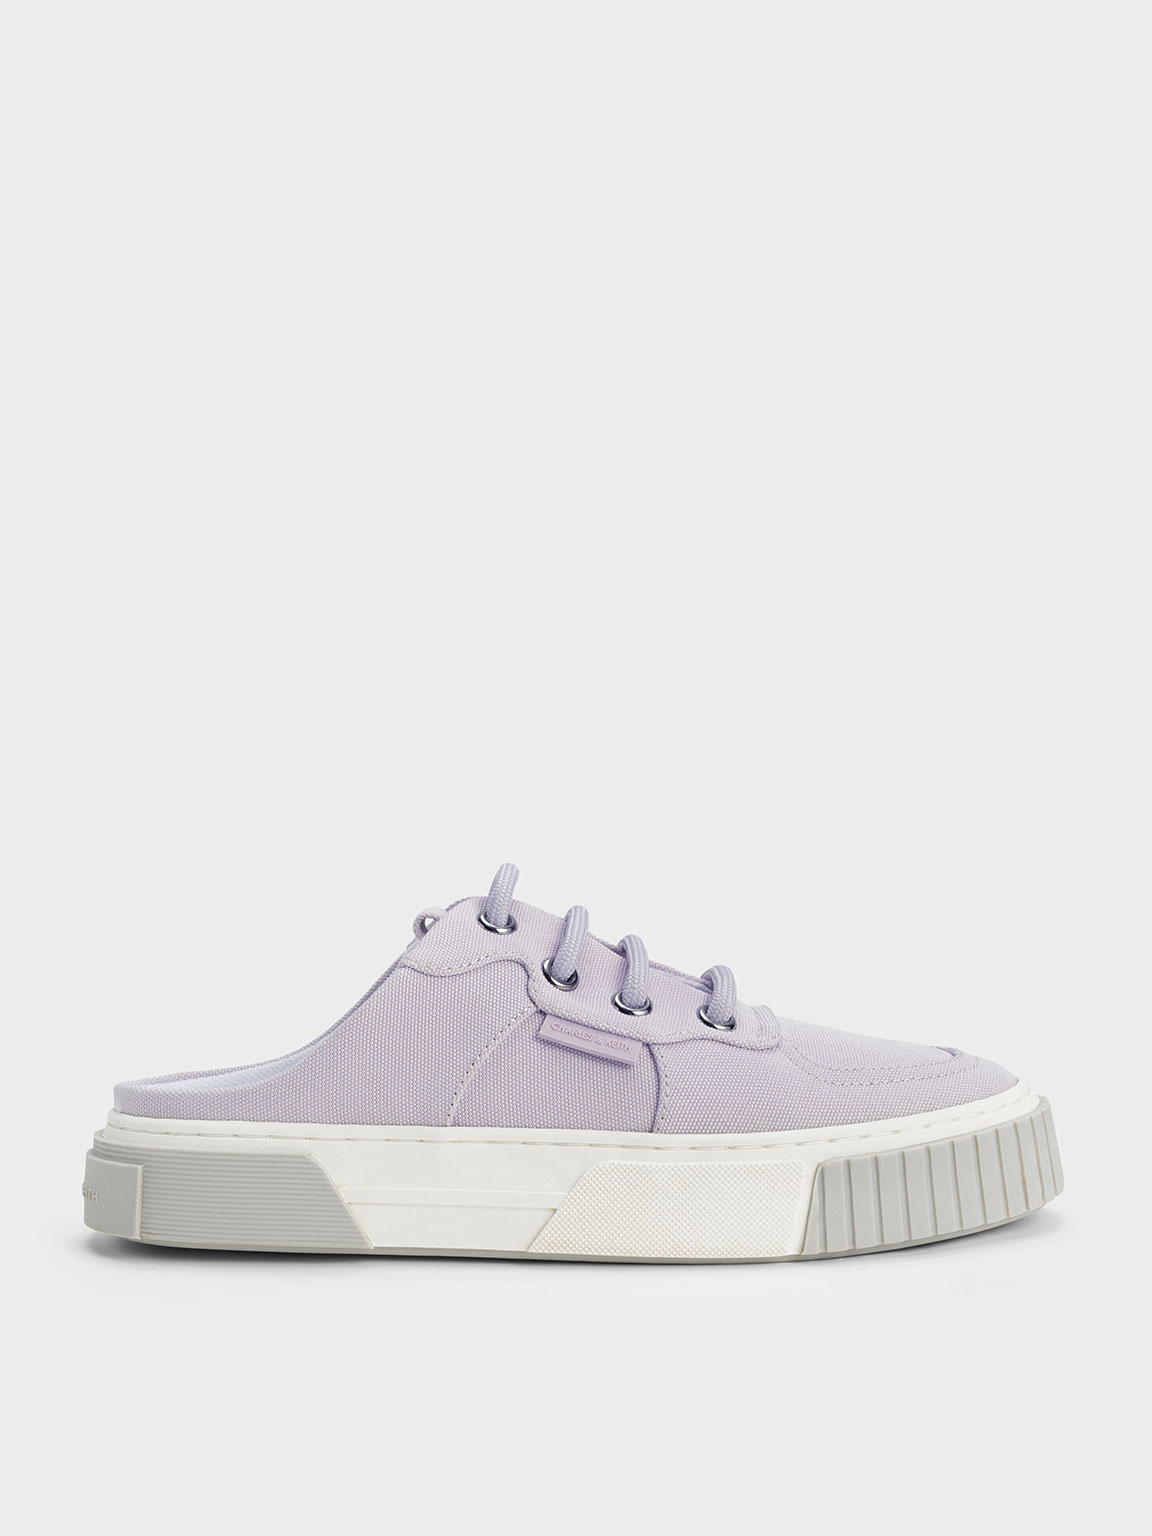 Charles & Keith Canvas Panelled Slip-on Sneakers In Lilac